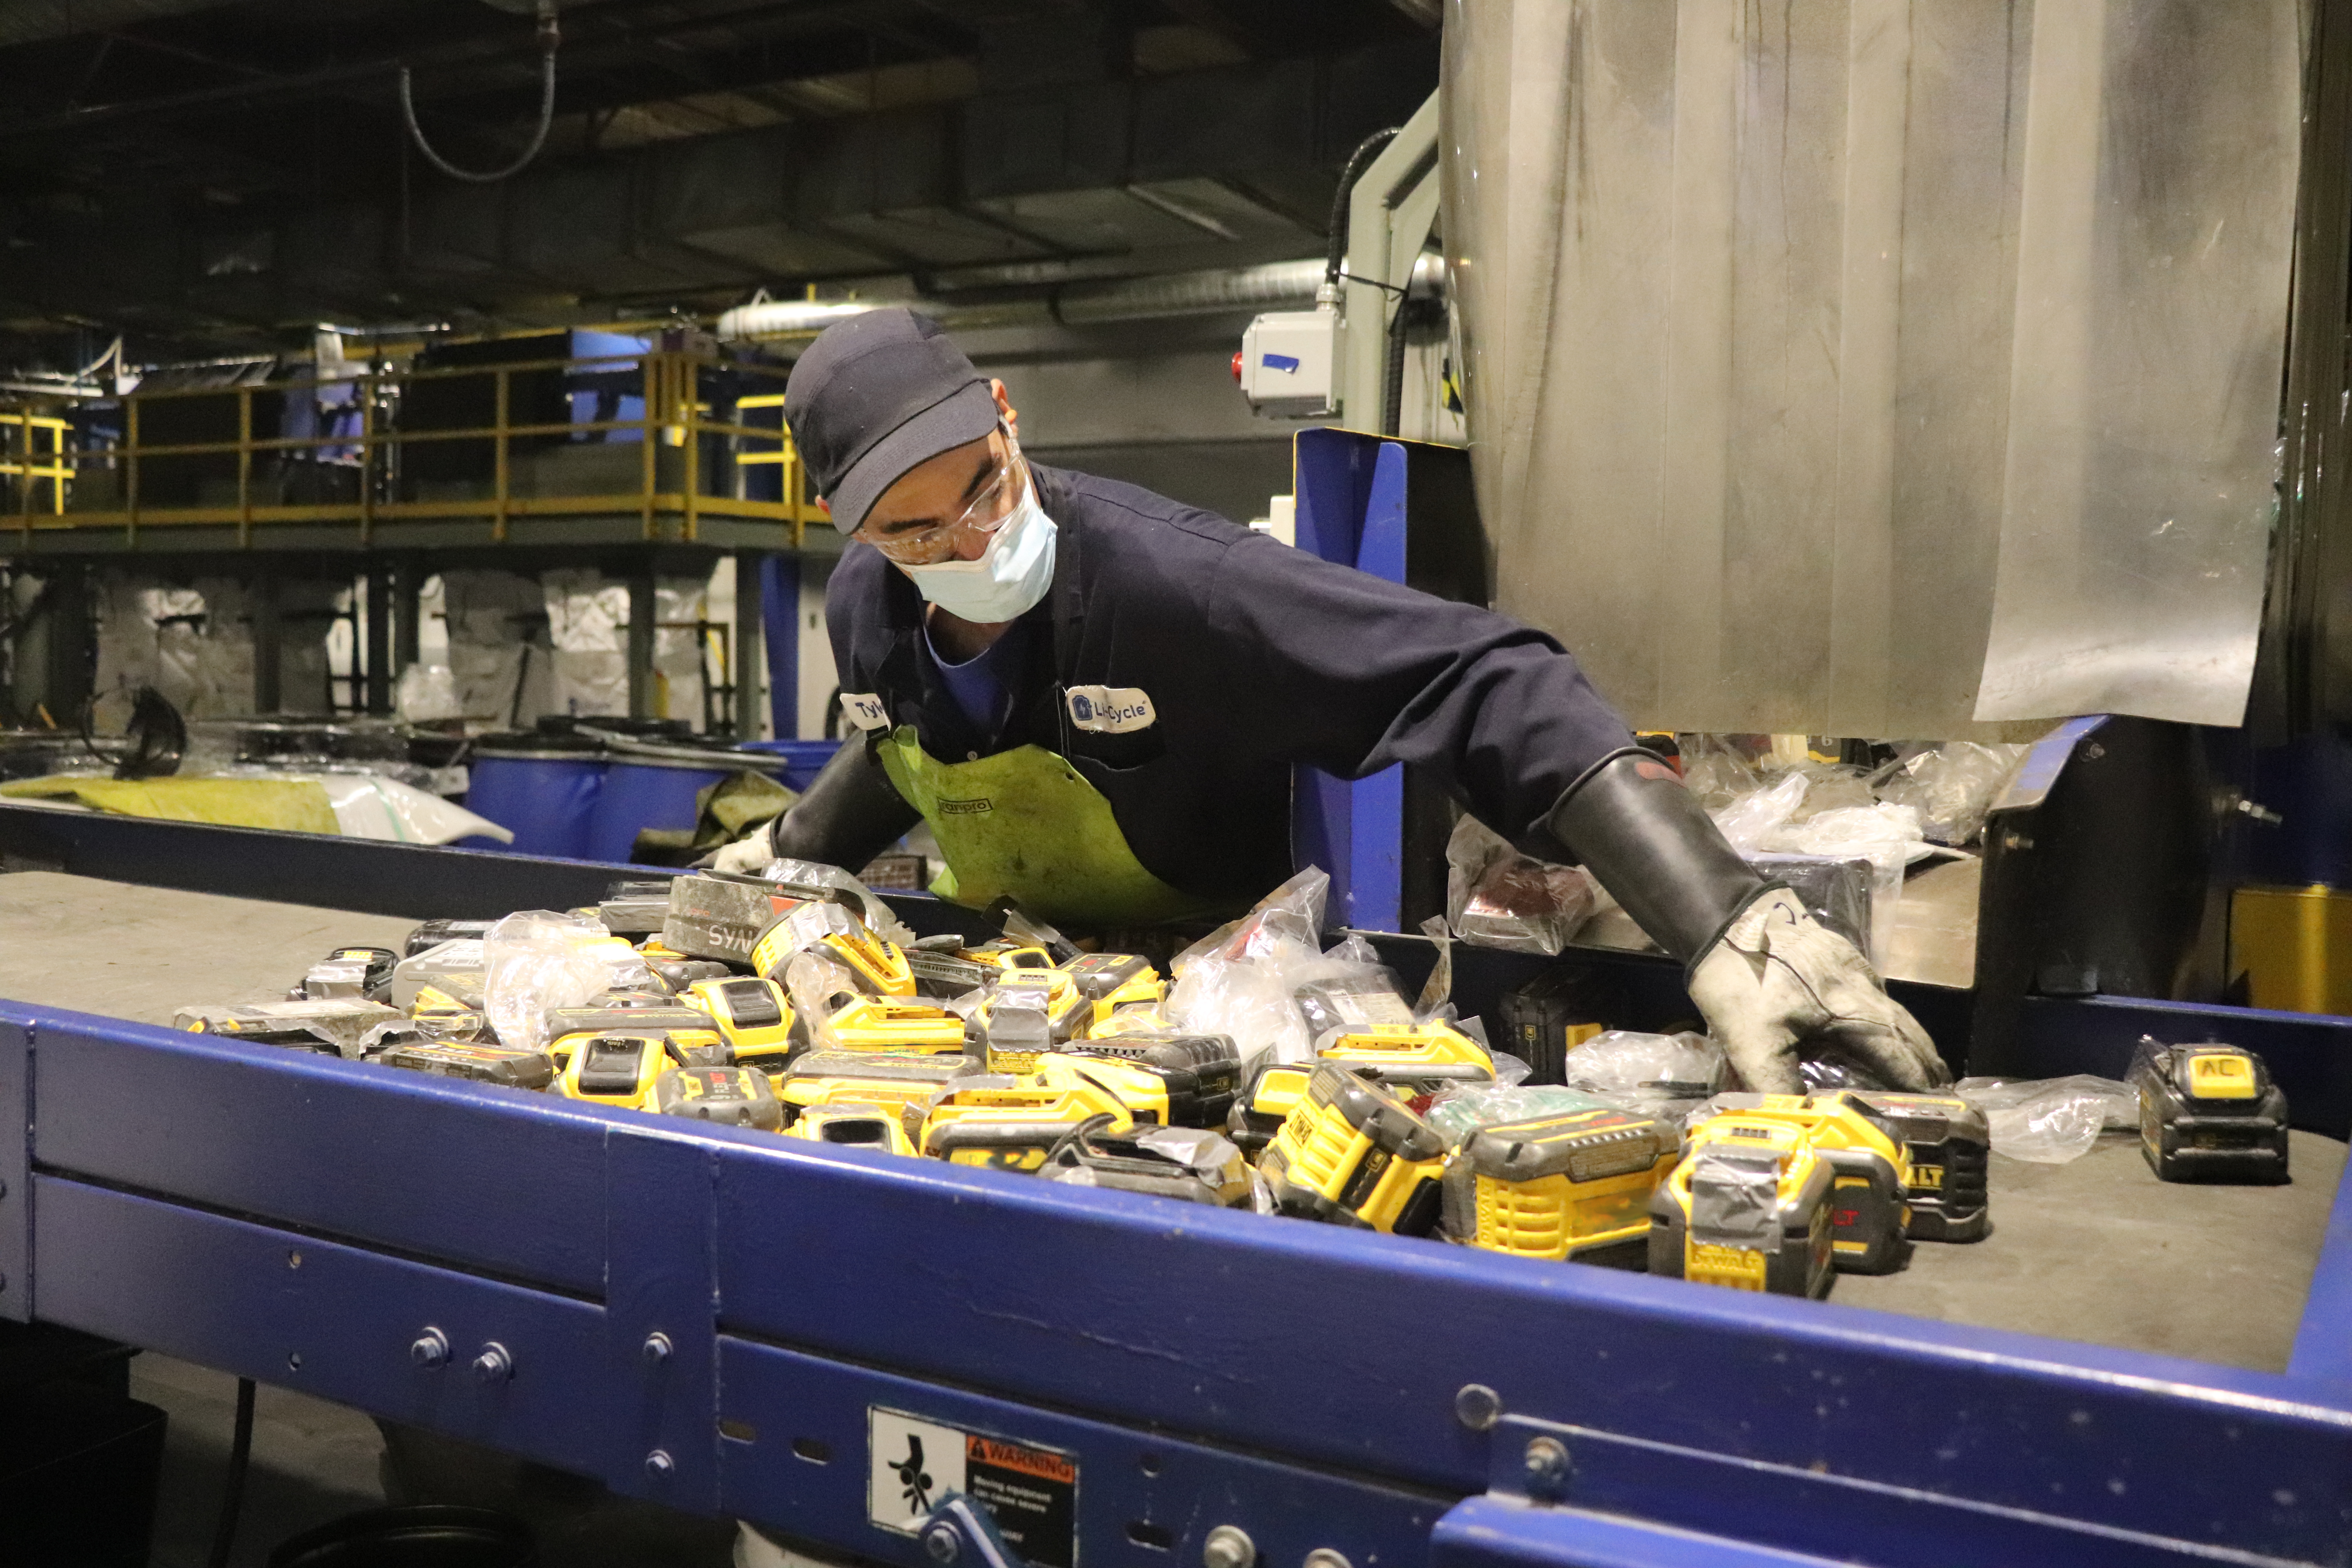 Li-Cycle employee wearing safety gear sorting assorted batteries.